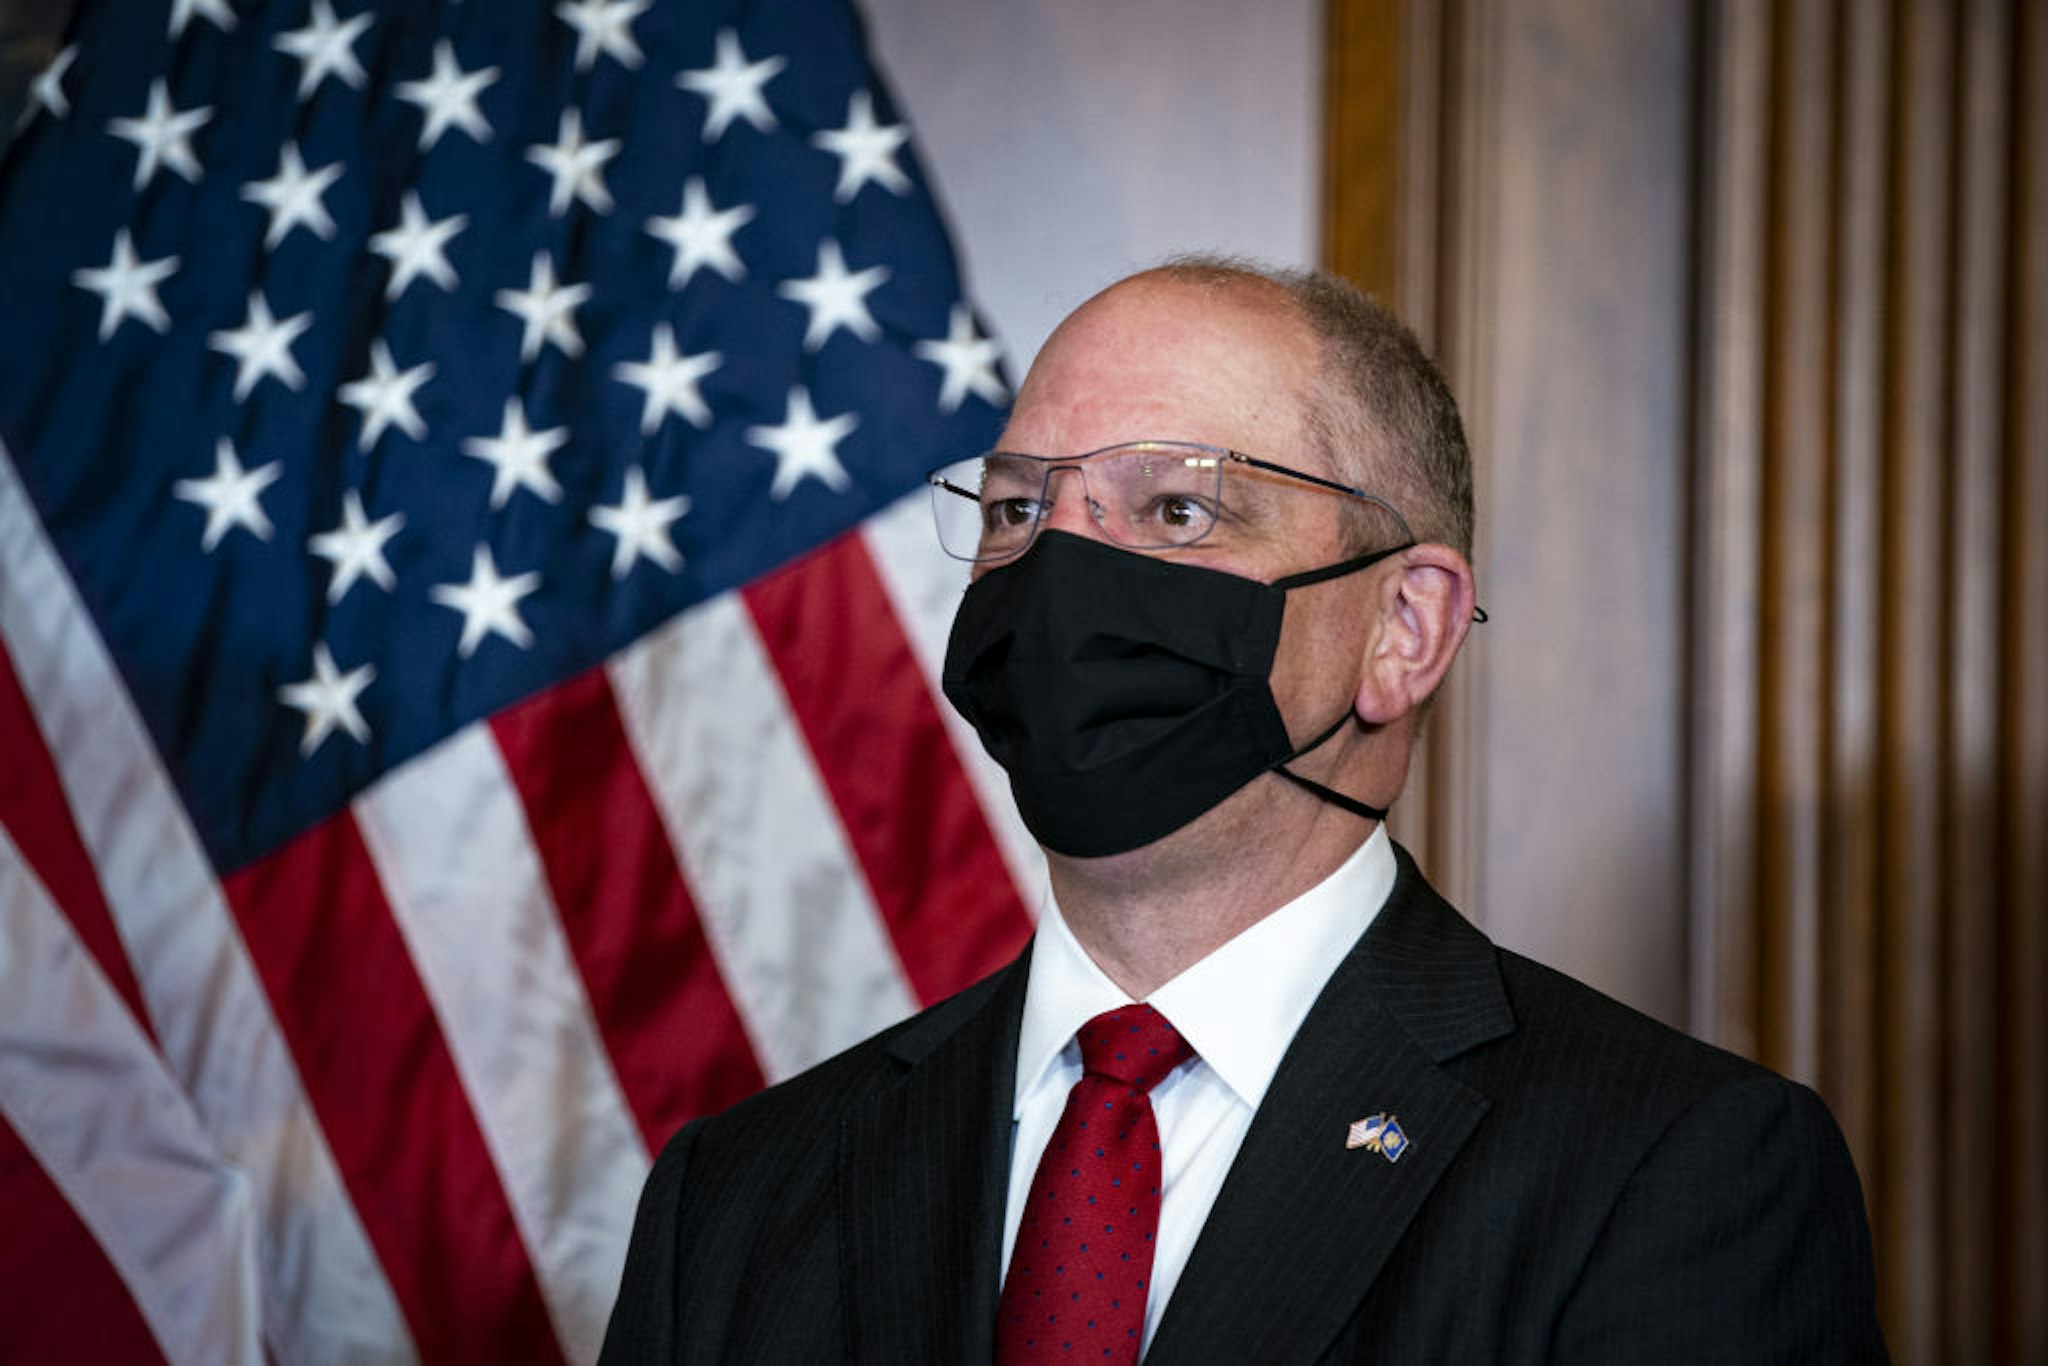 John Bel Edwards, governor of Louisiana, wears a protective mask as he participates in the mock swearing-in ceremony for Representative-elect Troy Carter, a Democrat from Louisiana, not pictured, in the Rayburn Room in the U.S. Capitol in Washington, D.C., U.S., on Tuesday, May 11, 2021. Lawmakers face an uncertain path forward on a debt limit fix, as experts offer differing projections of how soon they'll have to raise or suspend the ceiling to avoid a default on payments.